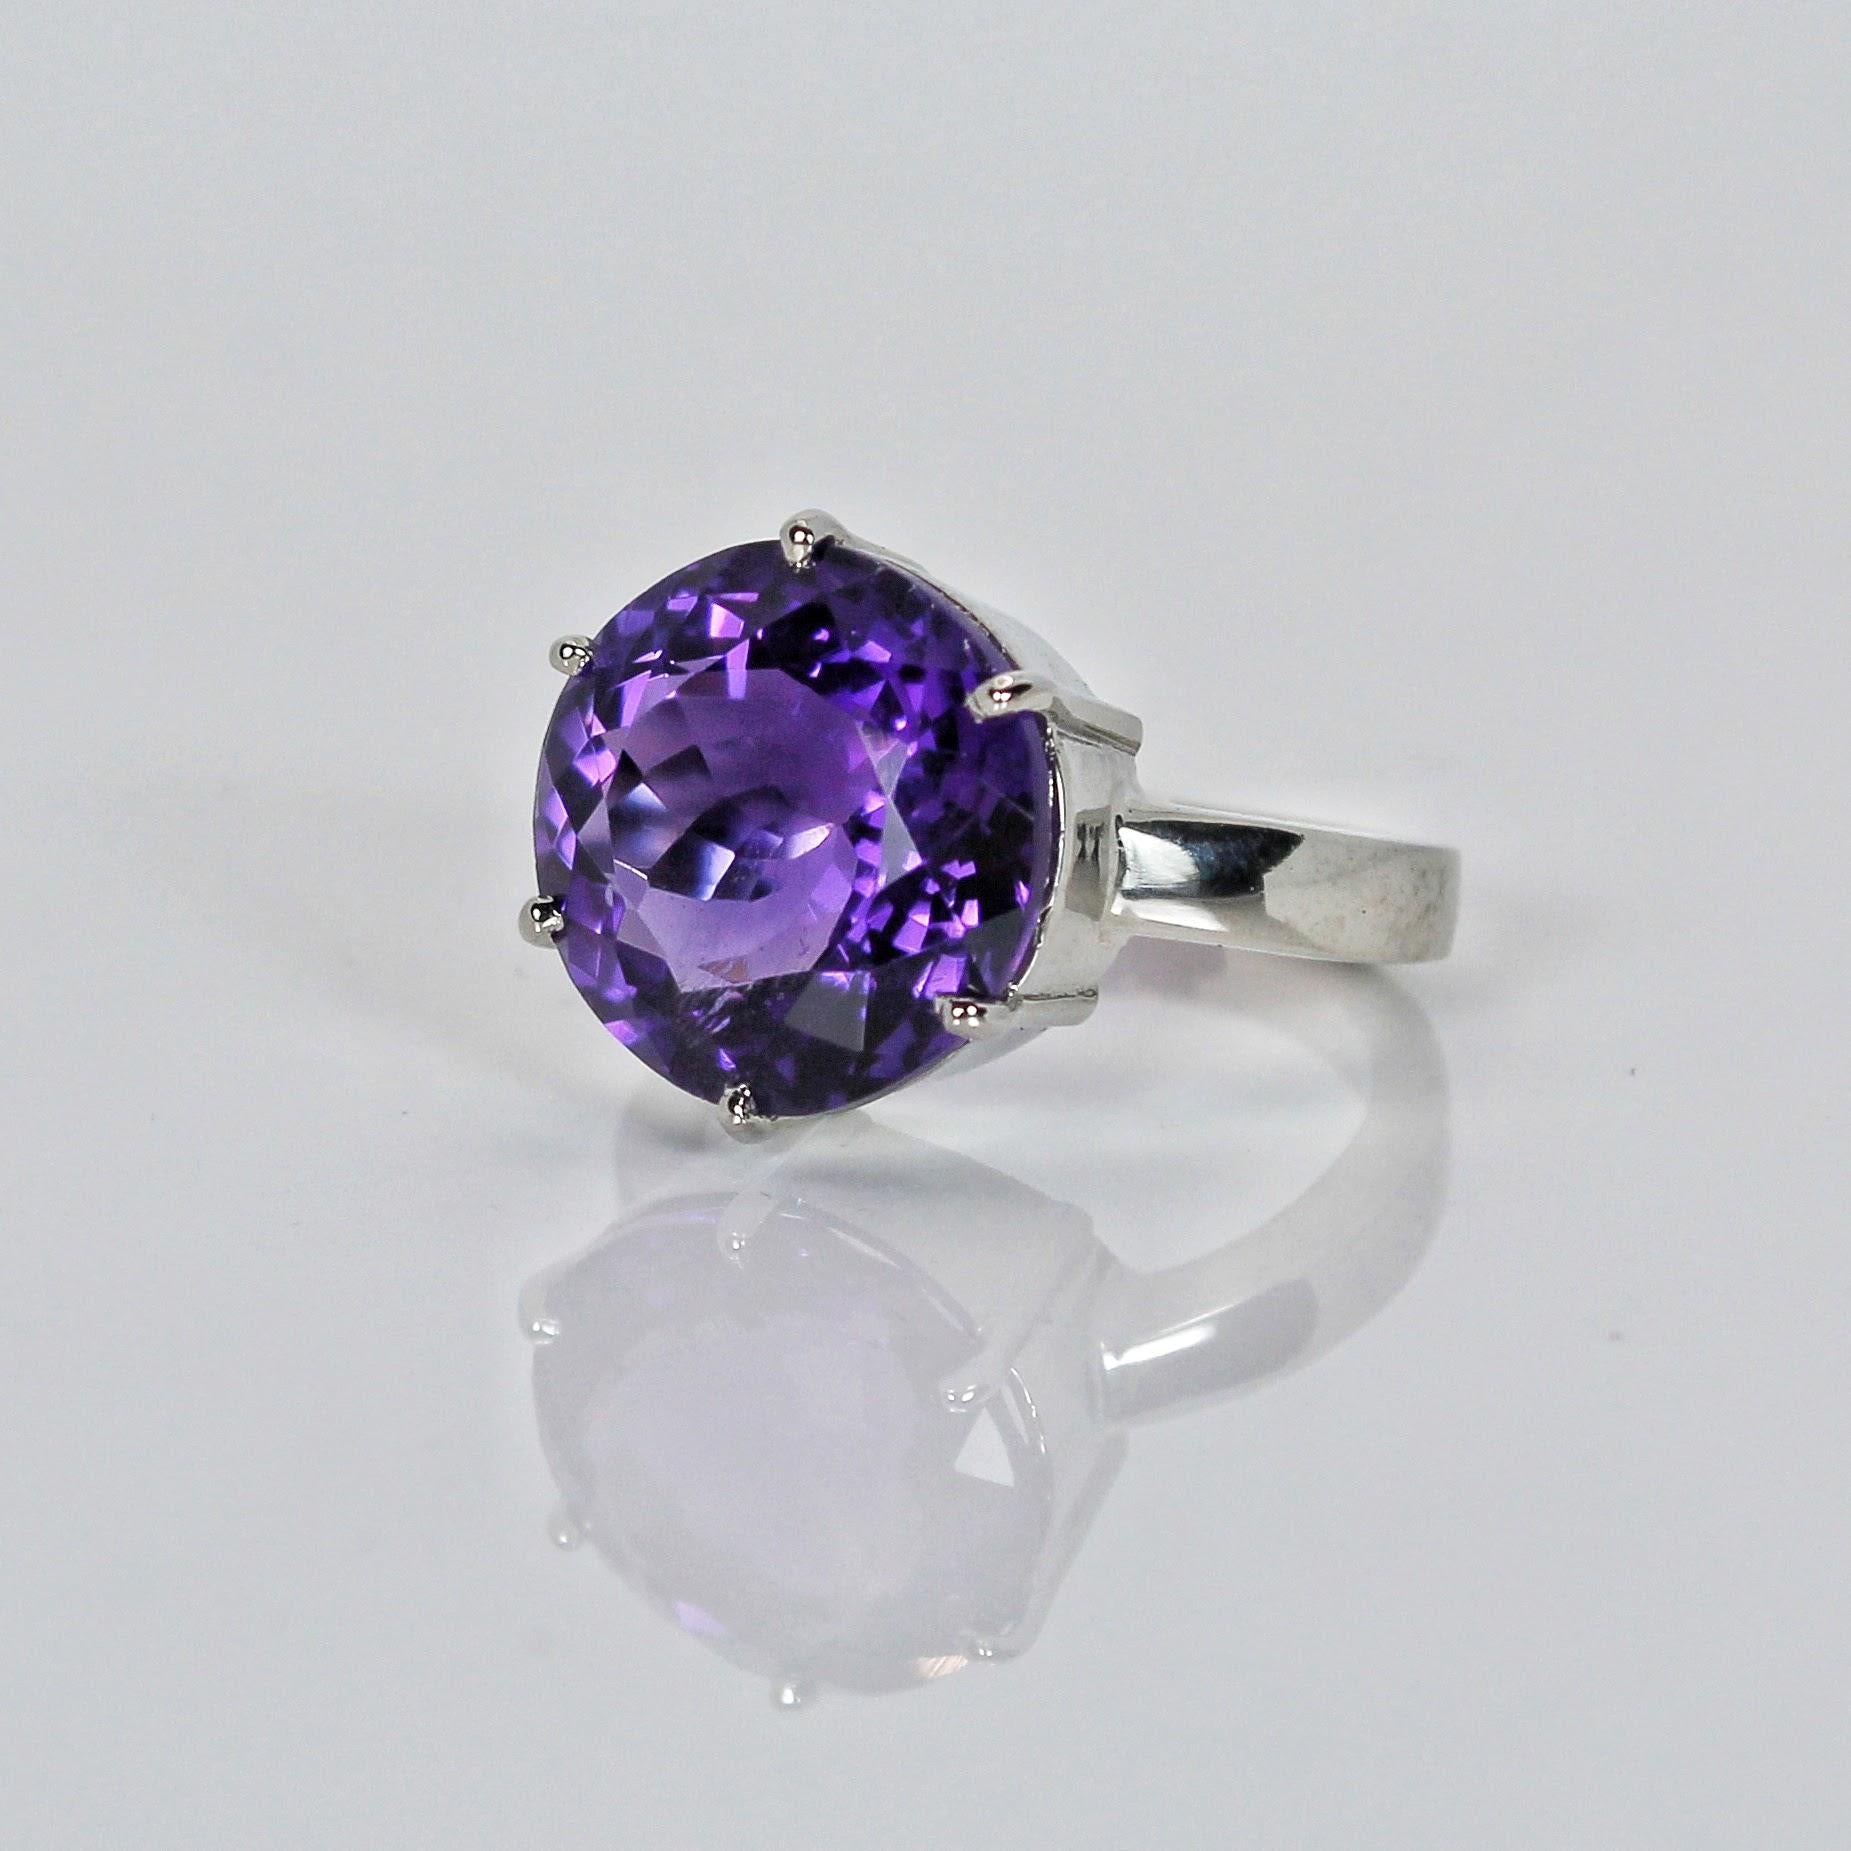 Women's Round Cut Natural Amethyst Gemstone Ring For Sale